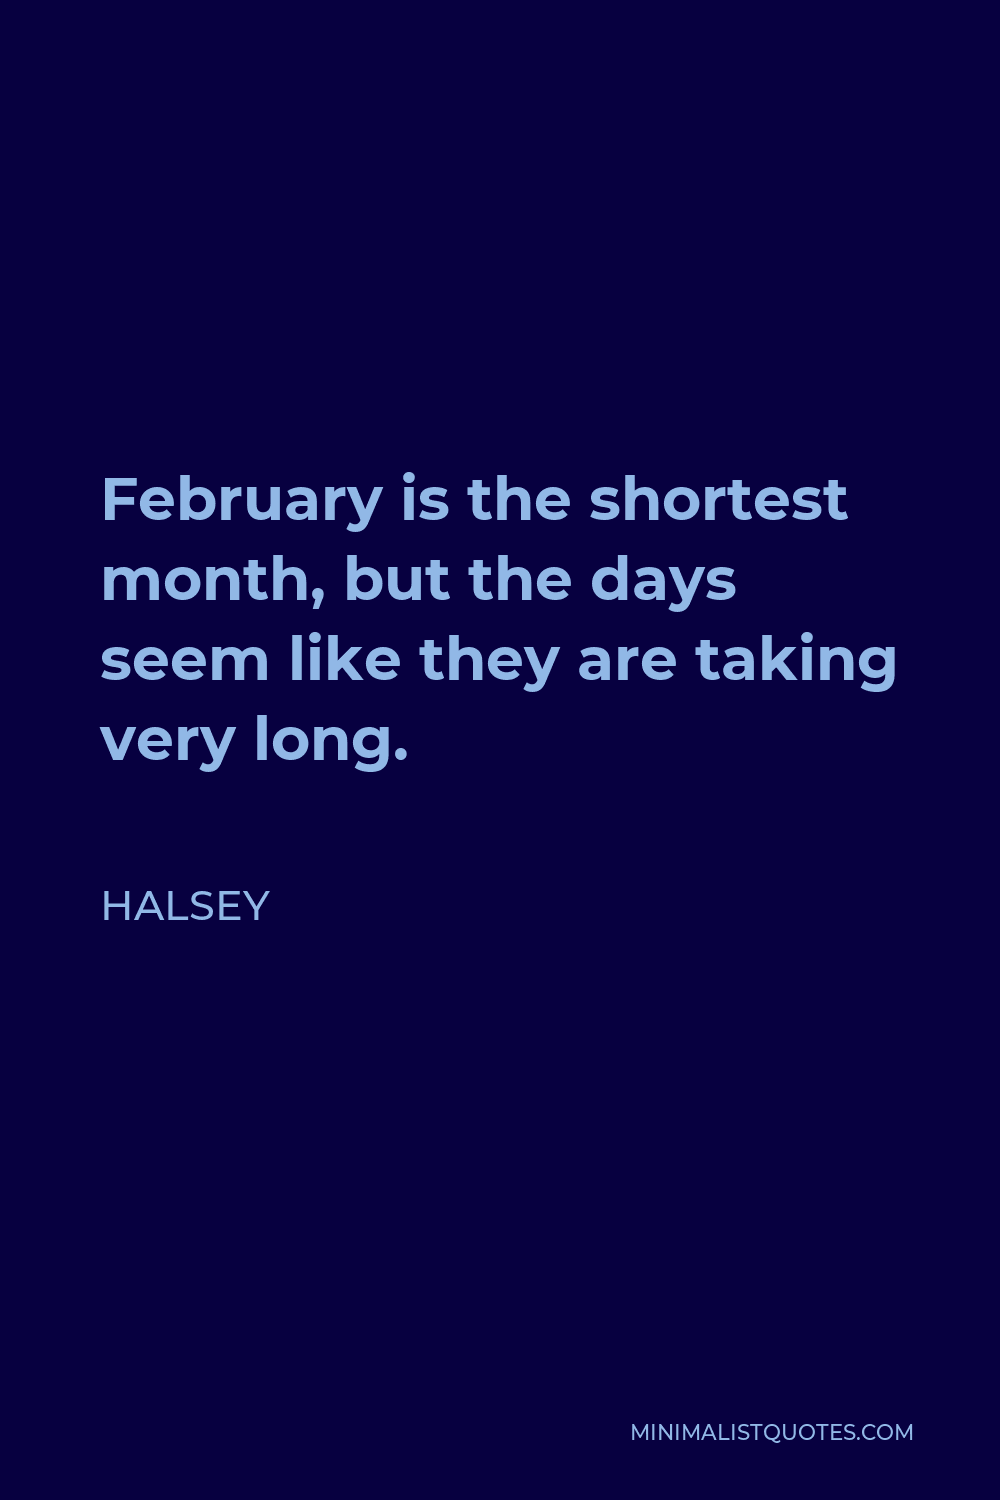 Halsey Quote - February is the shortest month, but the days seem like they are taking very long.